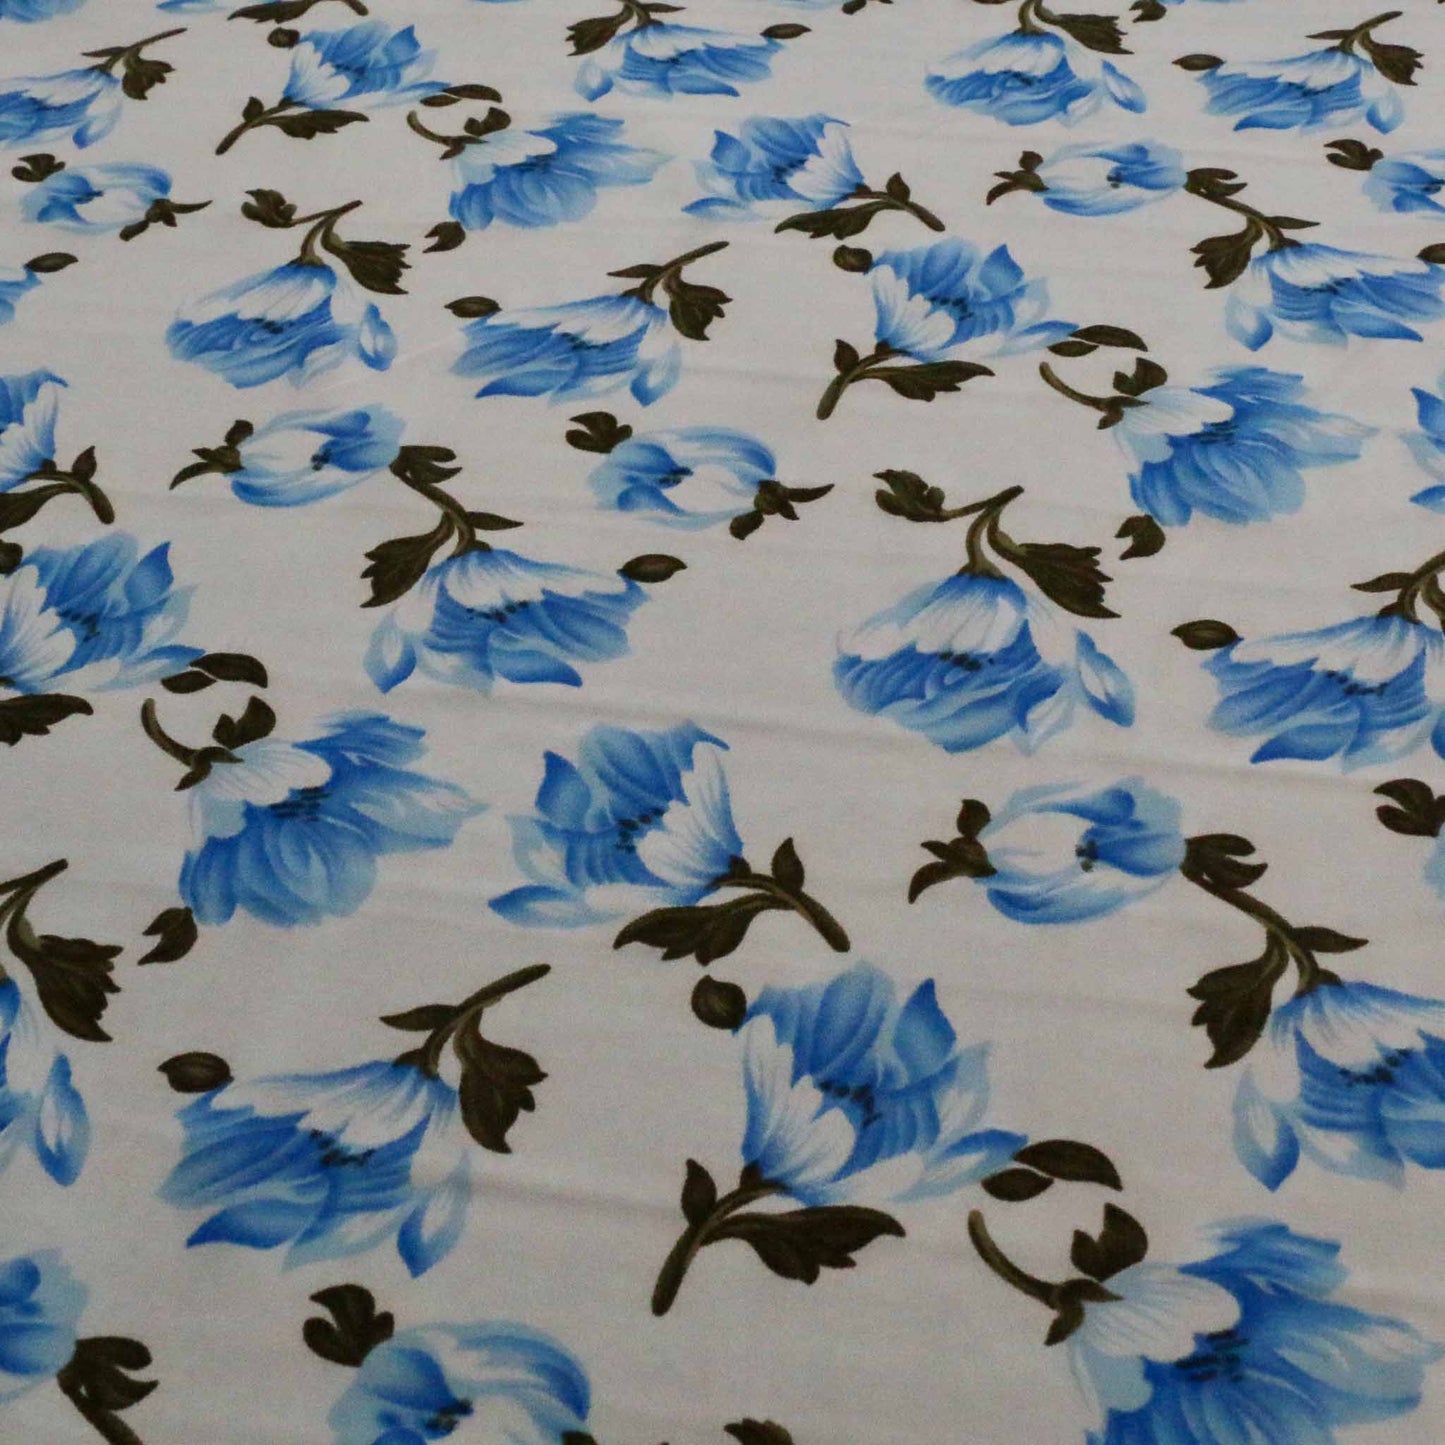 blue and white chiffon polyester synthetic stretchy dressmaking fabric with floral print design